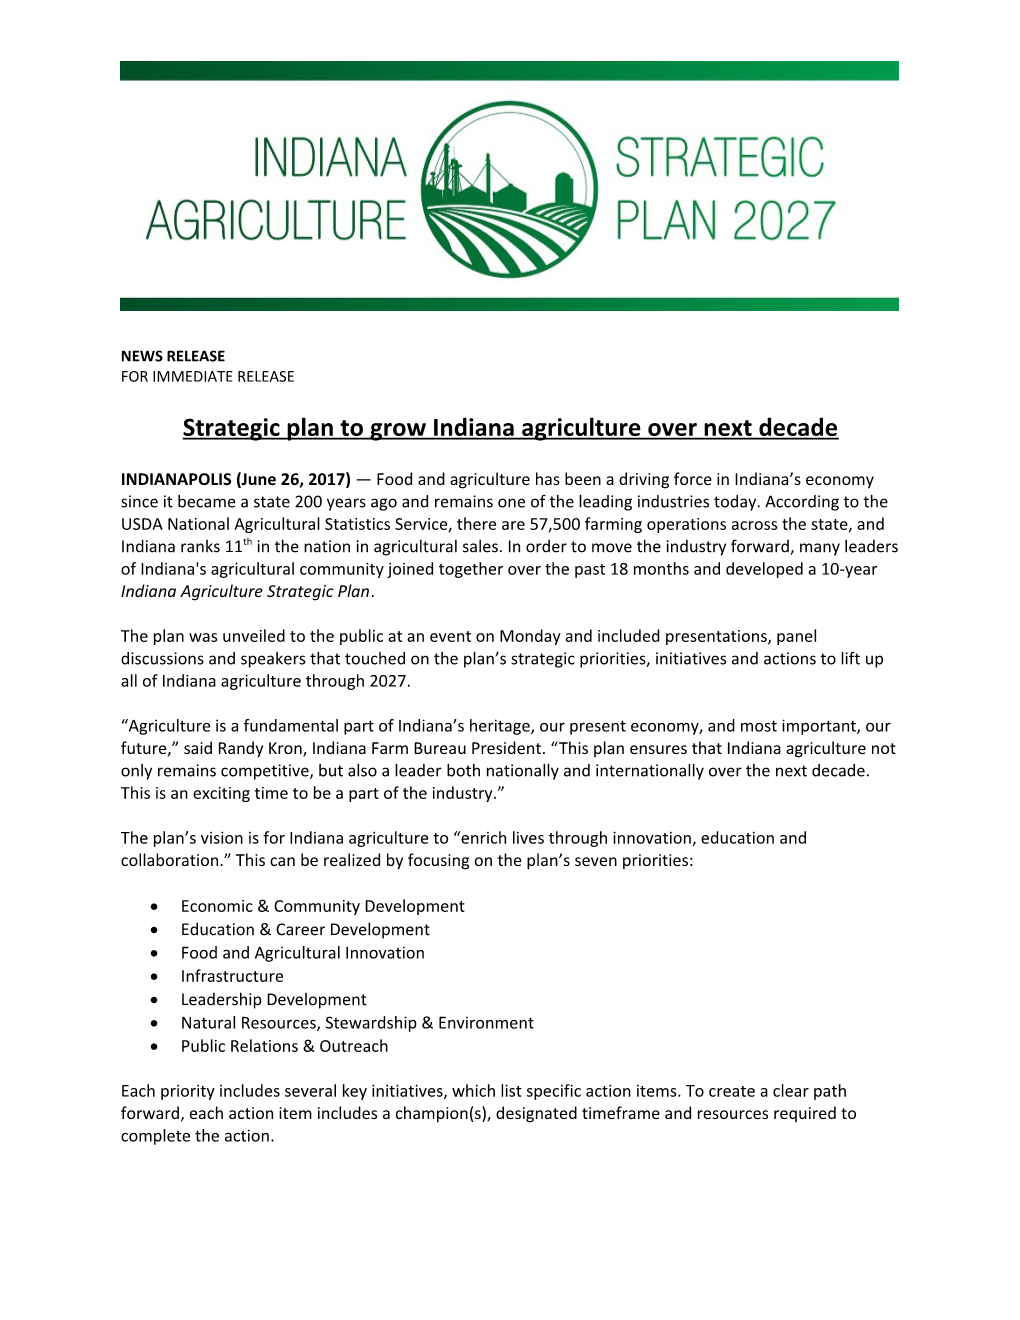 Strategic Plan to Grow Indiana Agriculture Over Next Decade